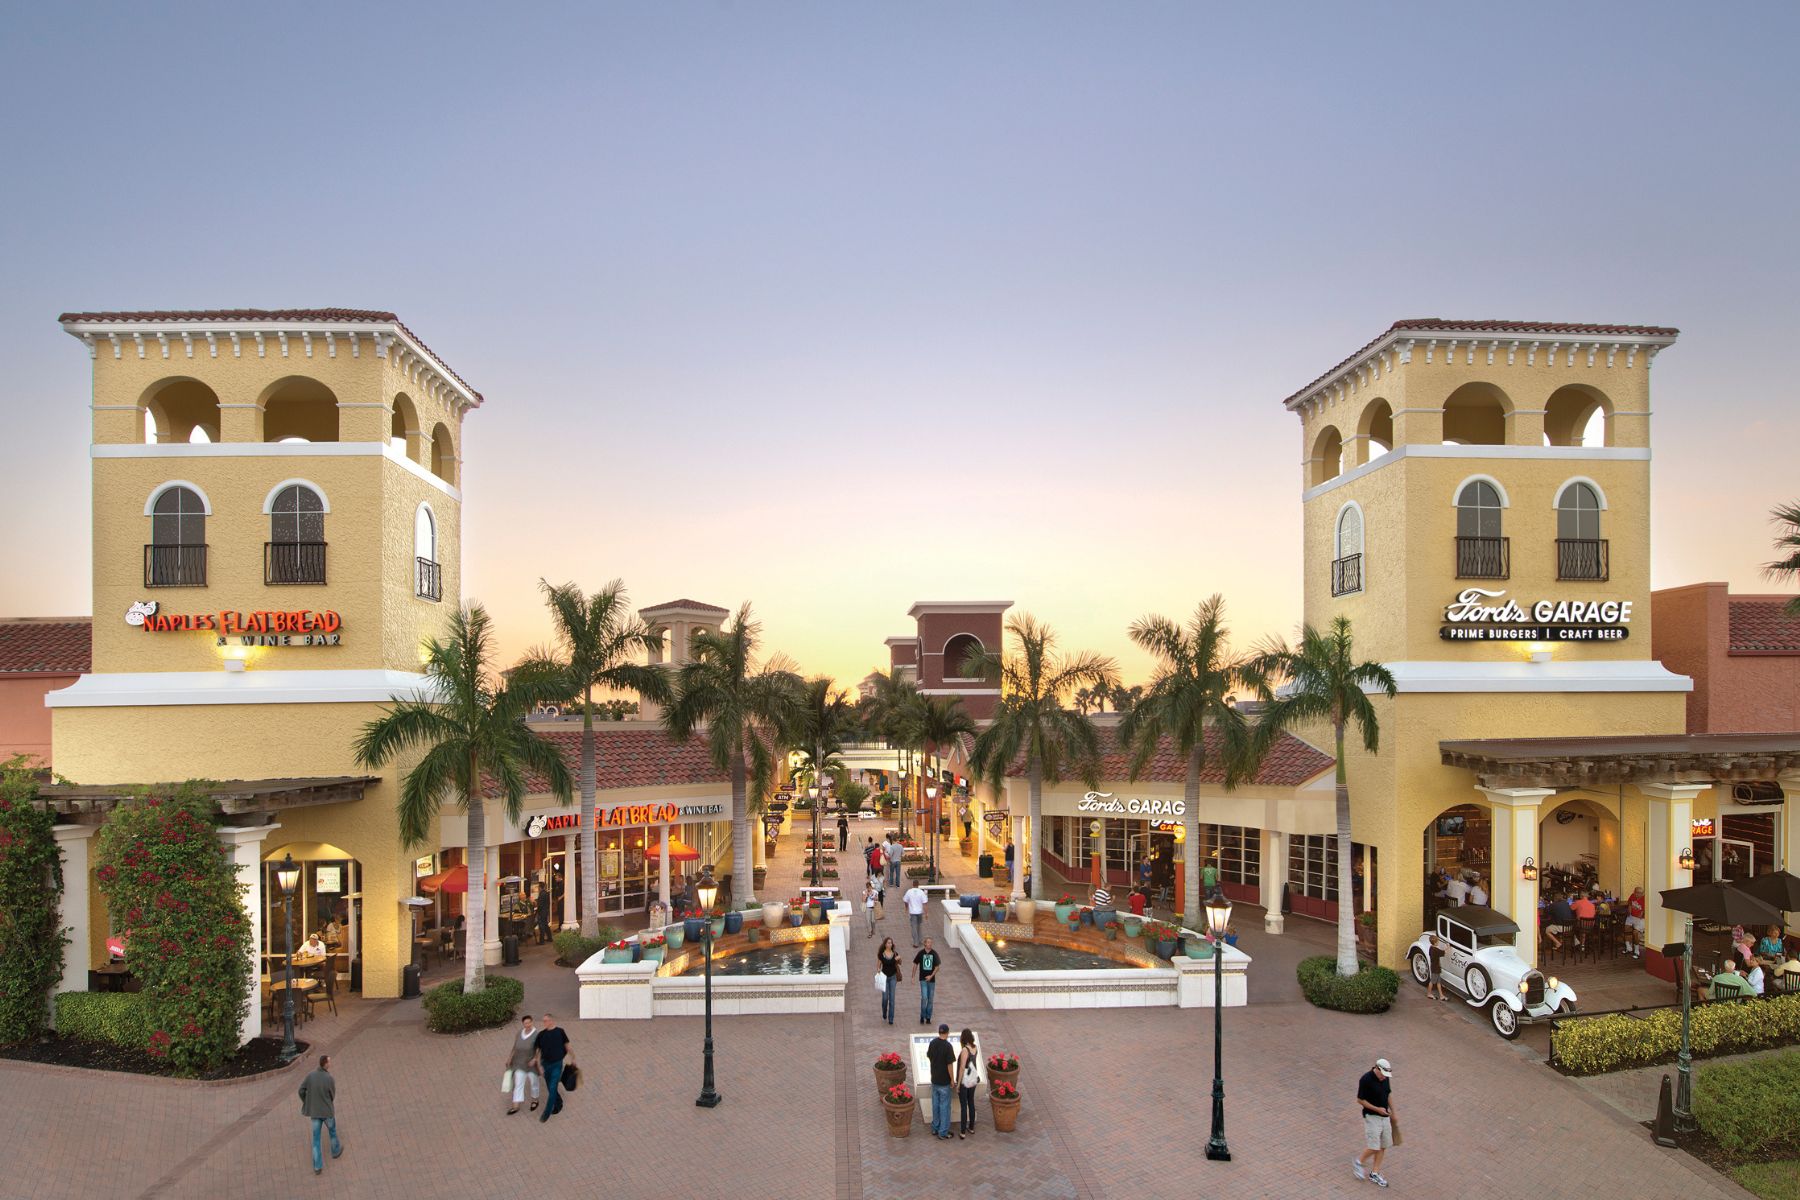 The Miromar Outlets, including Ford's Garage, in Fort Myers, Florida